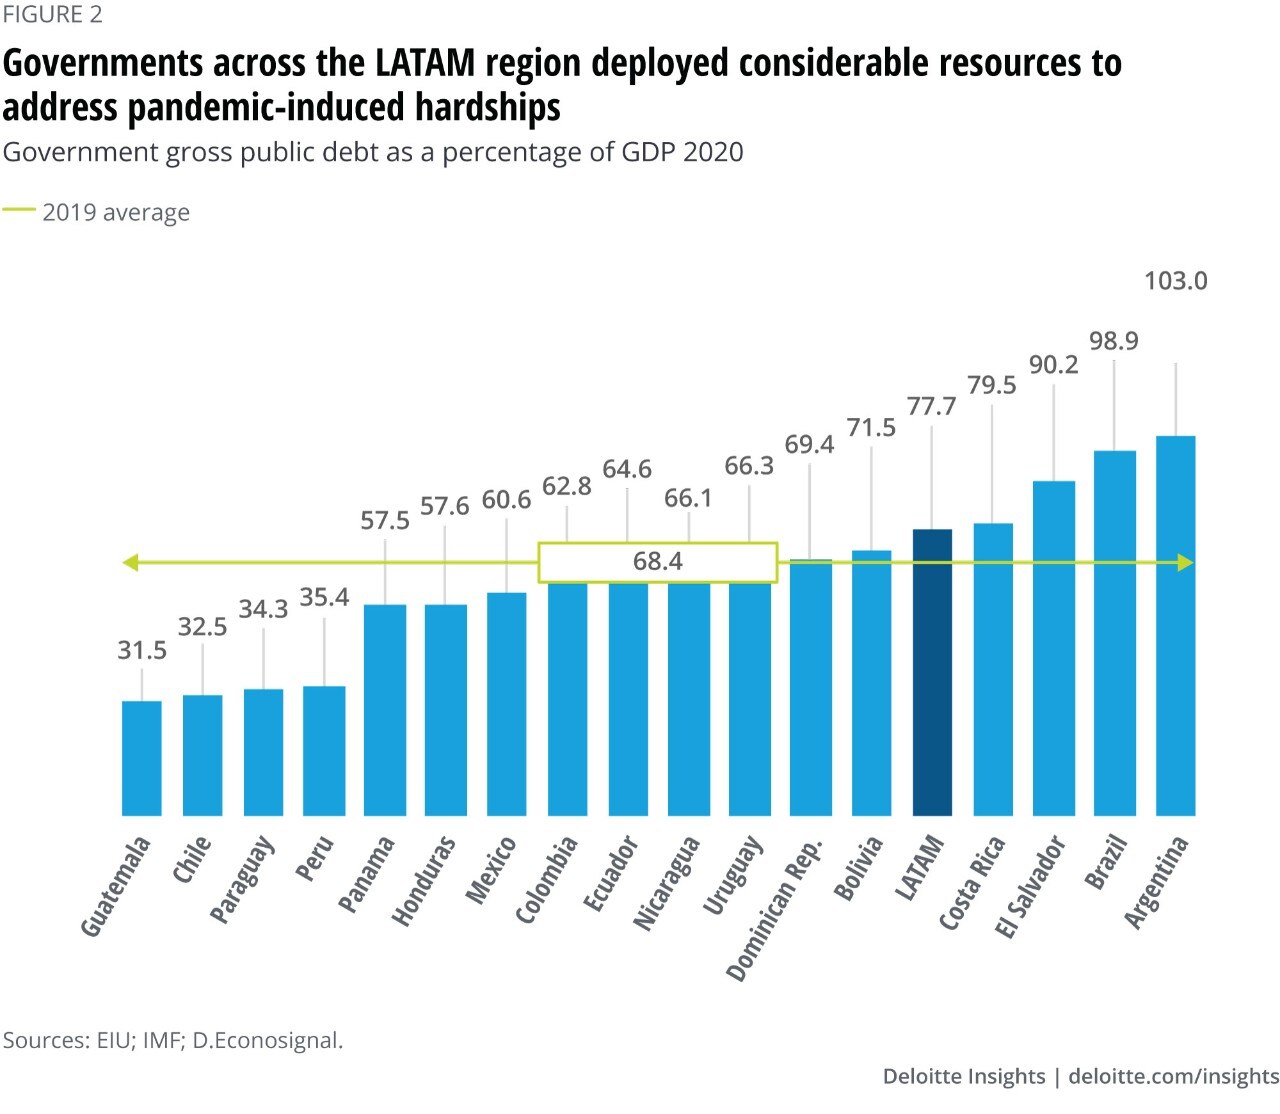 Figure 2. Governments across the LATAM region deployed considerable resources to address pandemic-induced hardships